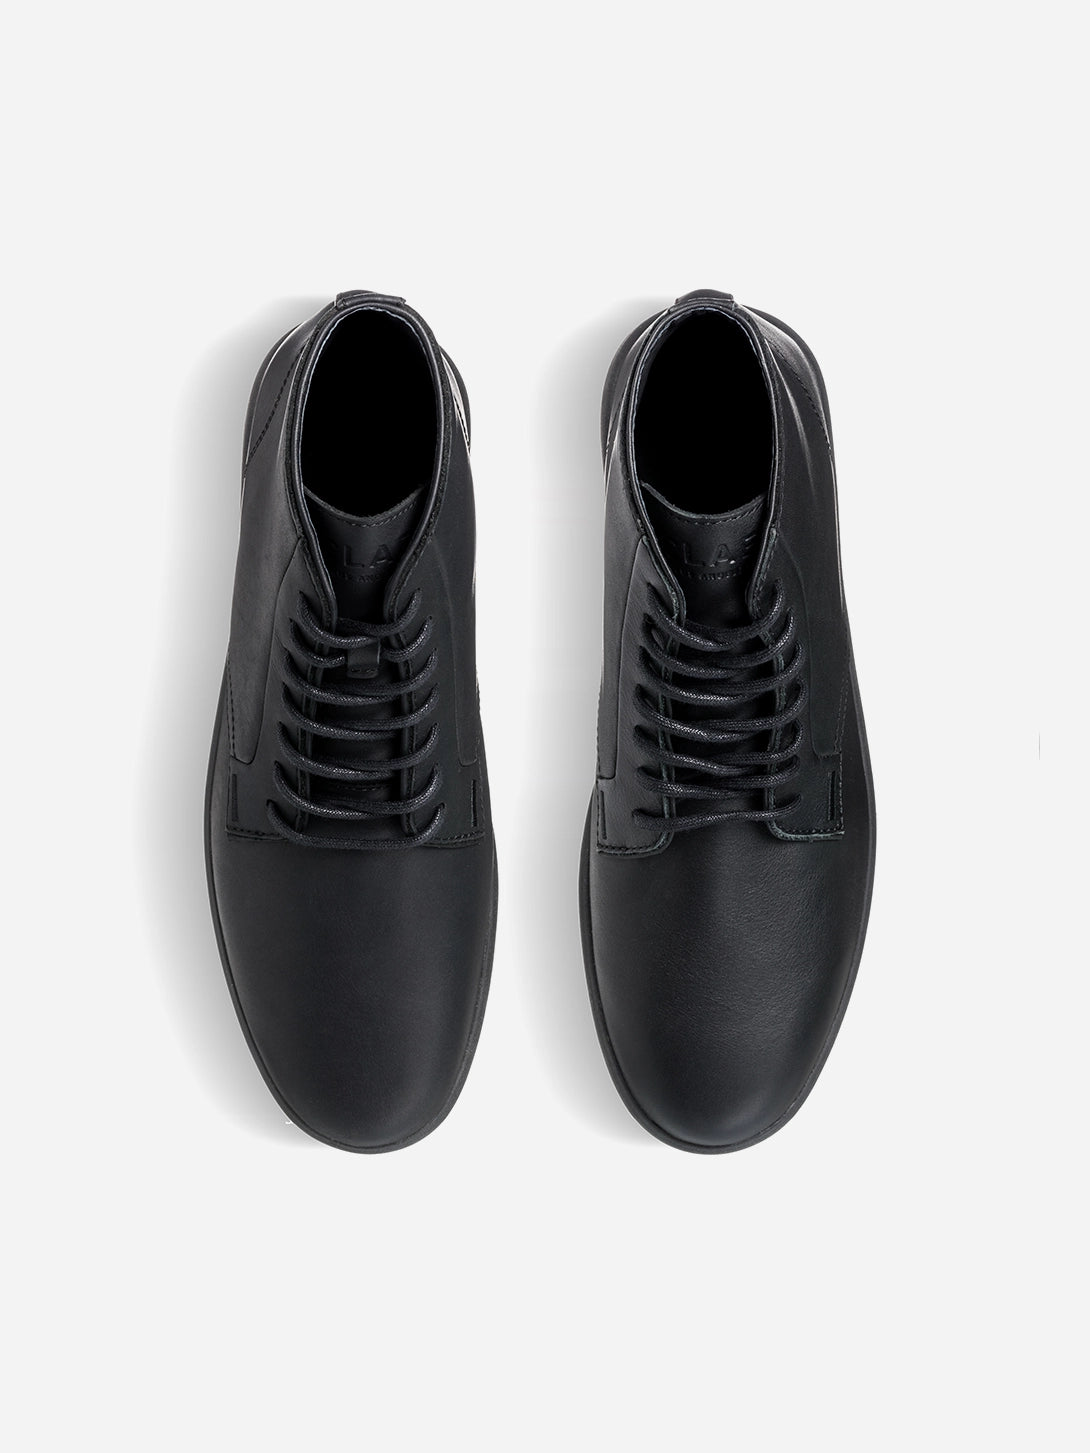 Triple Black Leather Boots Clae High Tops O.N.S Clothing